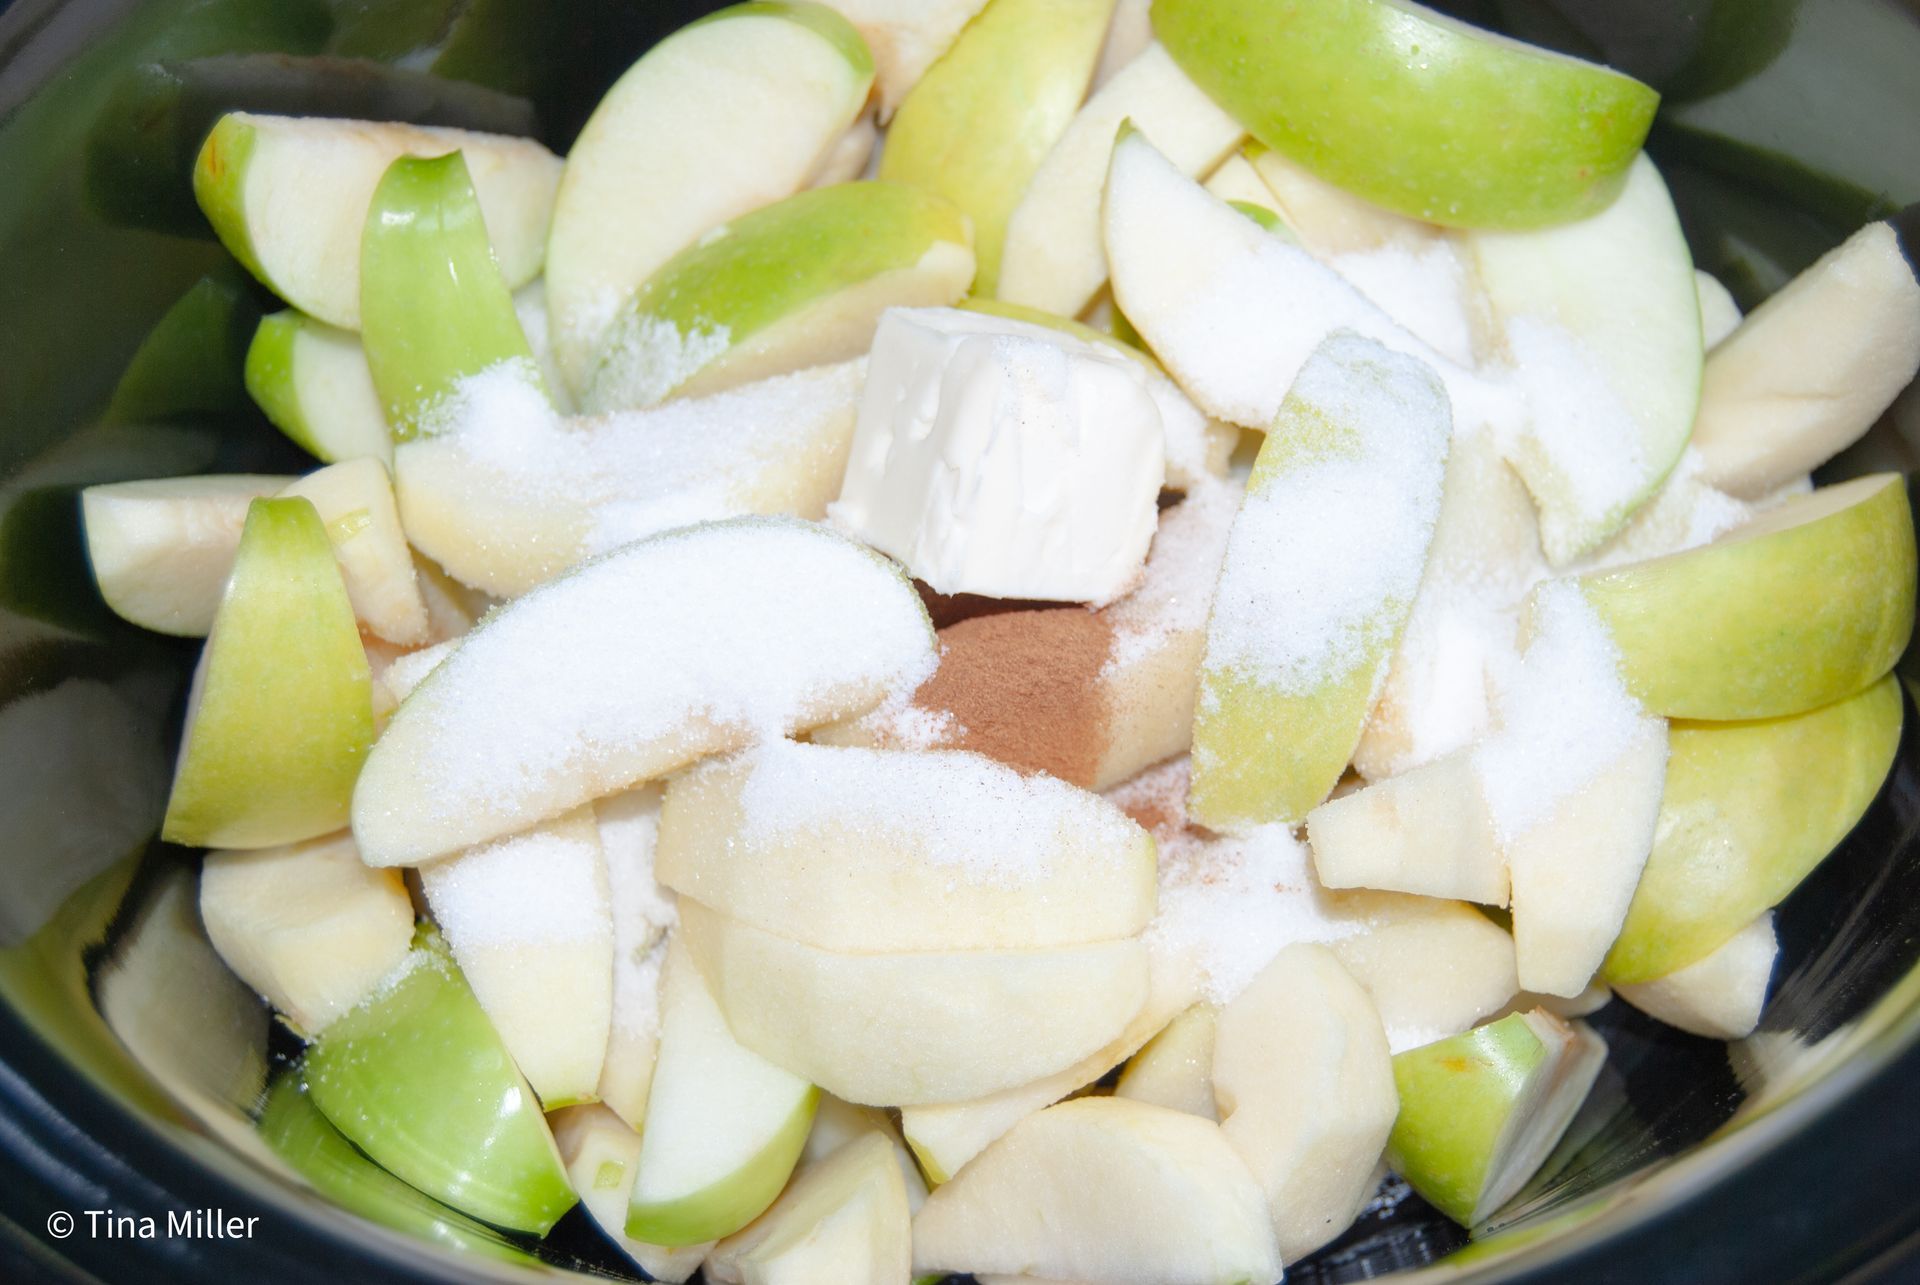 Granny Smith apples slices with skins left on some, piled high inside a crockpot topped with sugar, butter, kahlua, and cinnamon.